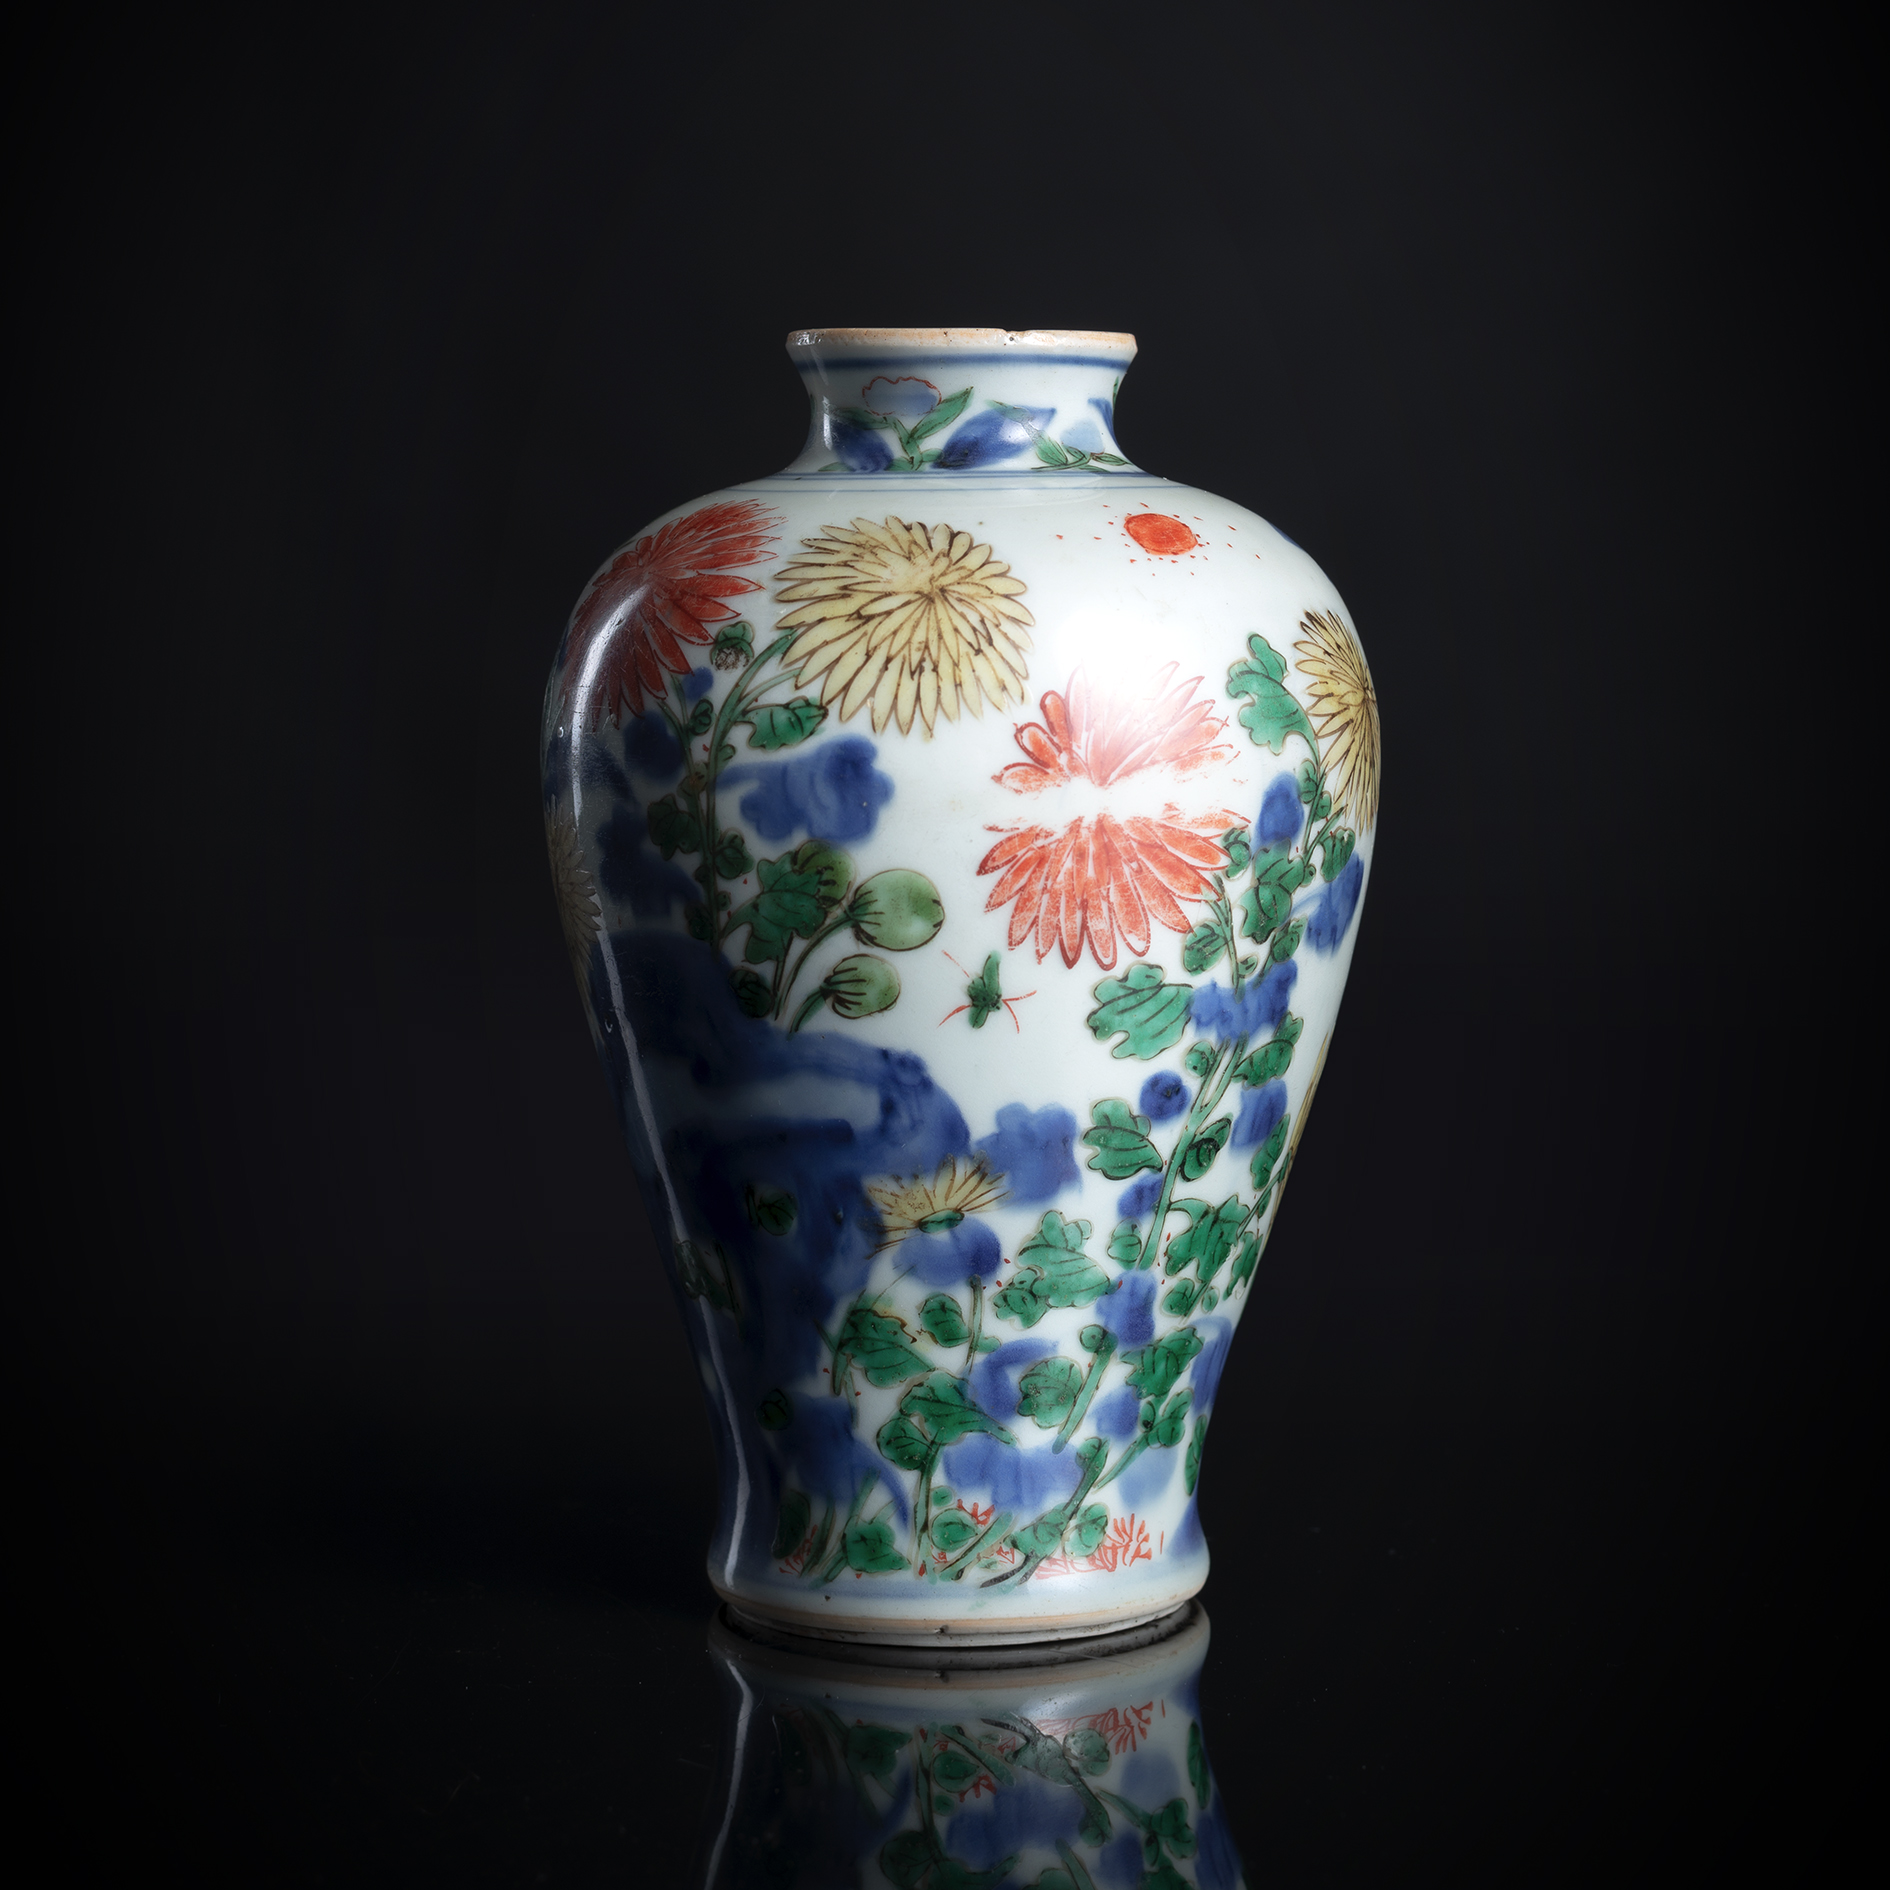 A WUCAÍ BOTTLE VASE WITH CHRYSANTHEMUM AND PEONIES